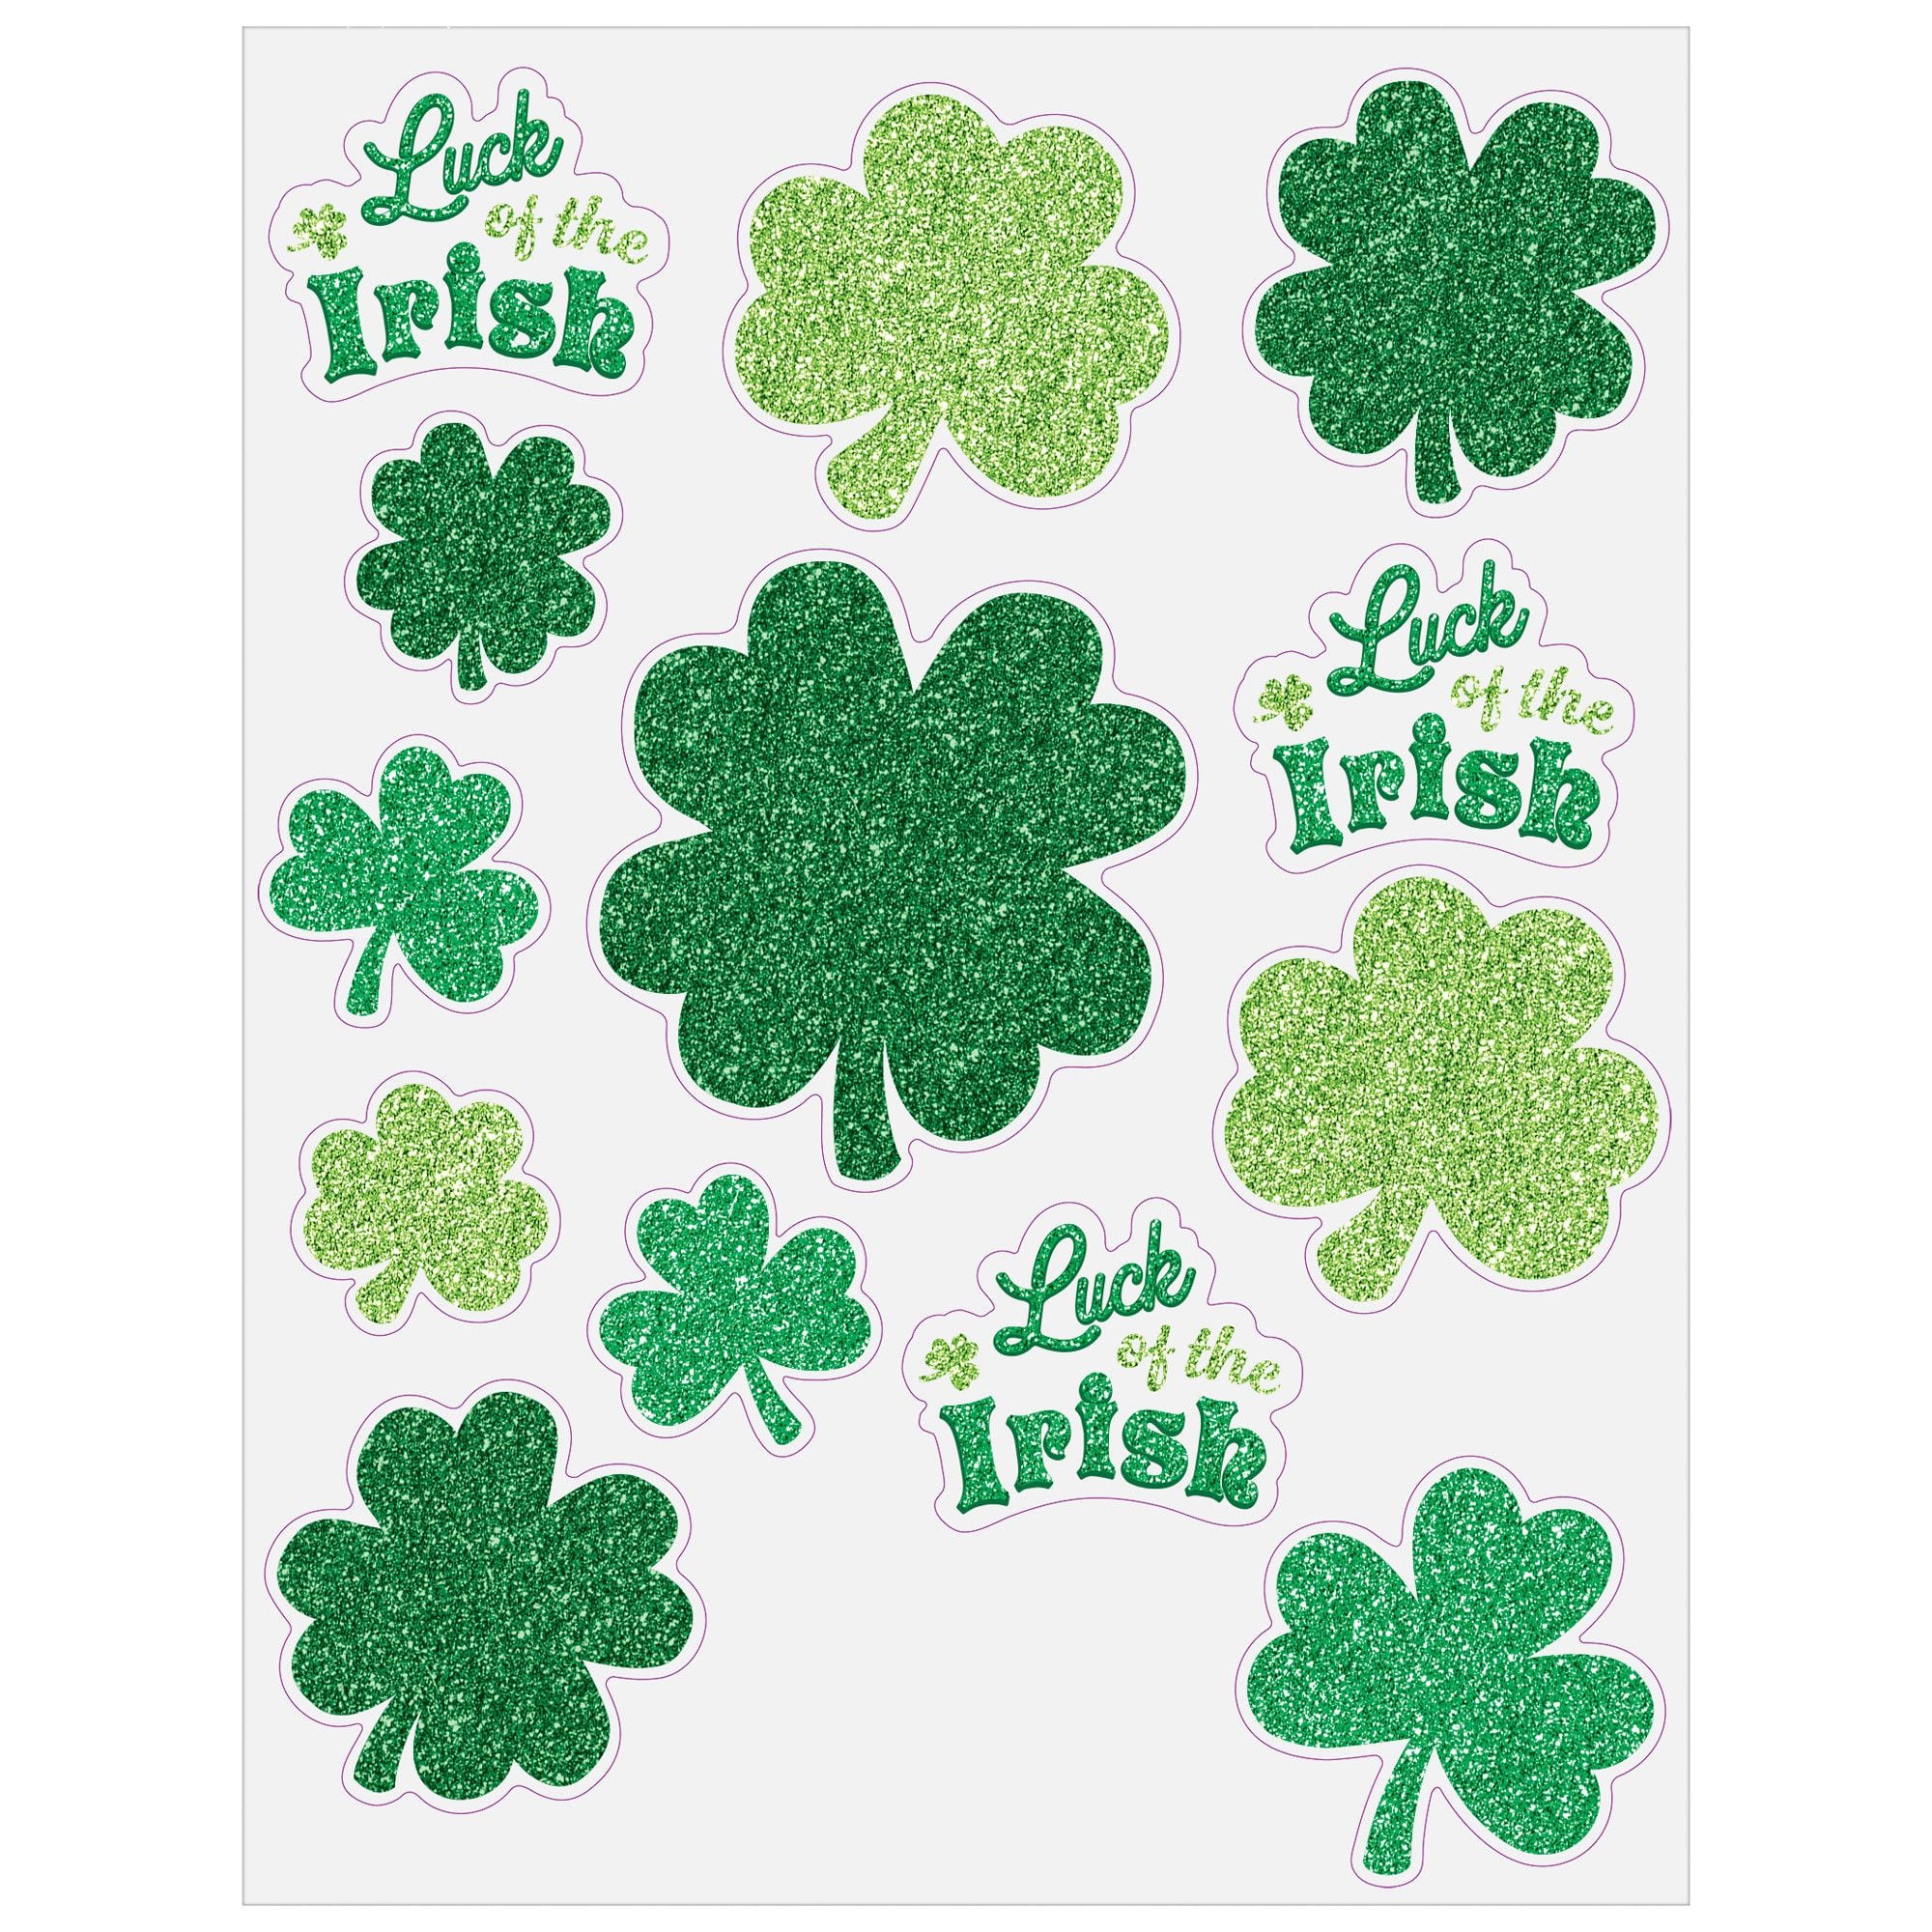 Luck of the Irish Window Decals | Party City